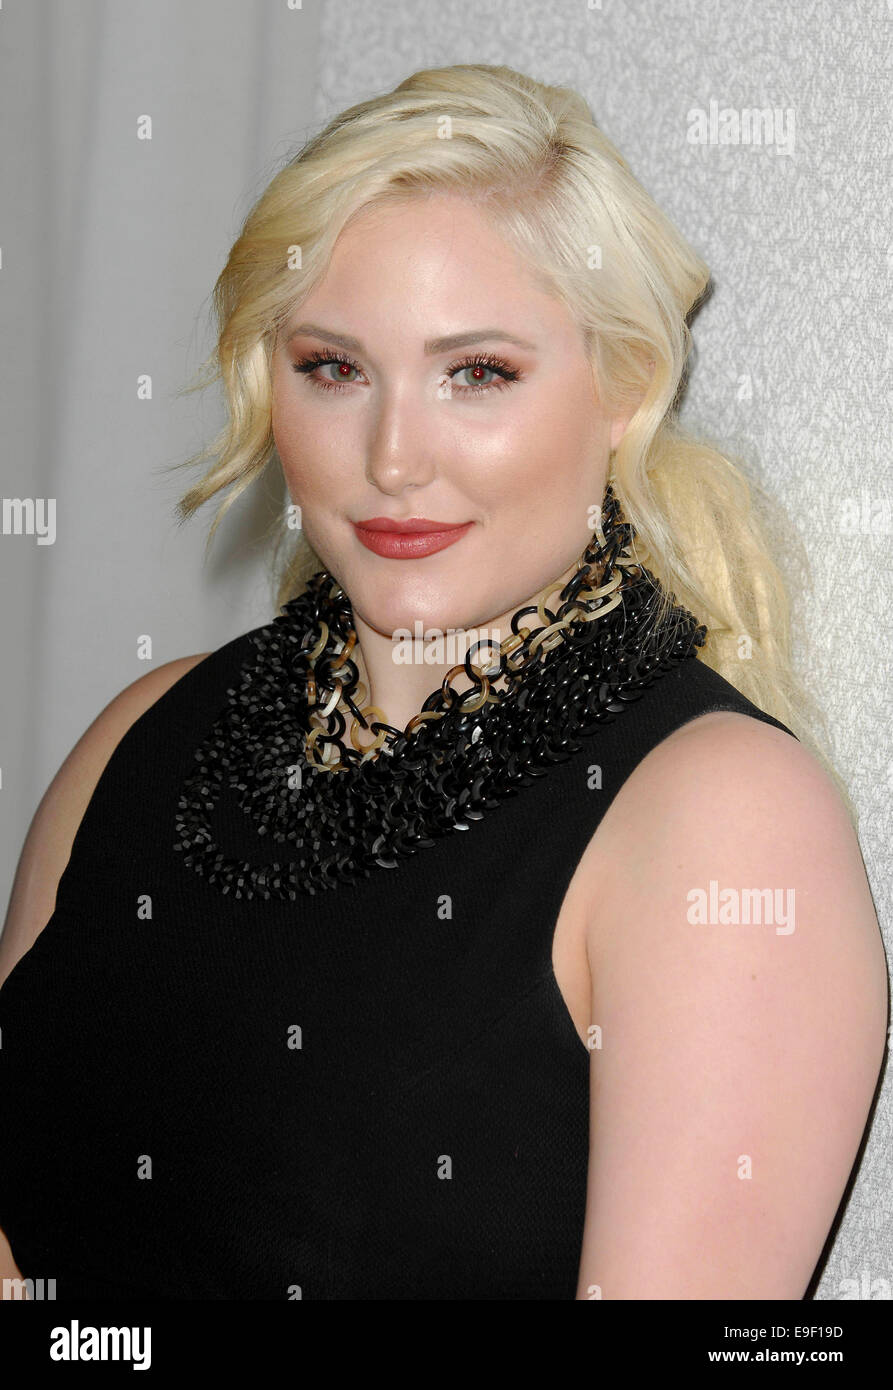 Hayley Hasselhoff LIFE & STYLE 10 YEAR ANNIVERSARY EVENT 2014.24.10 Hollywood/picture alliance Stock Photo